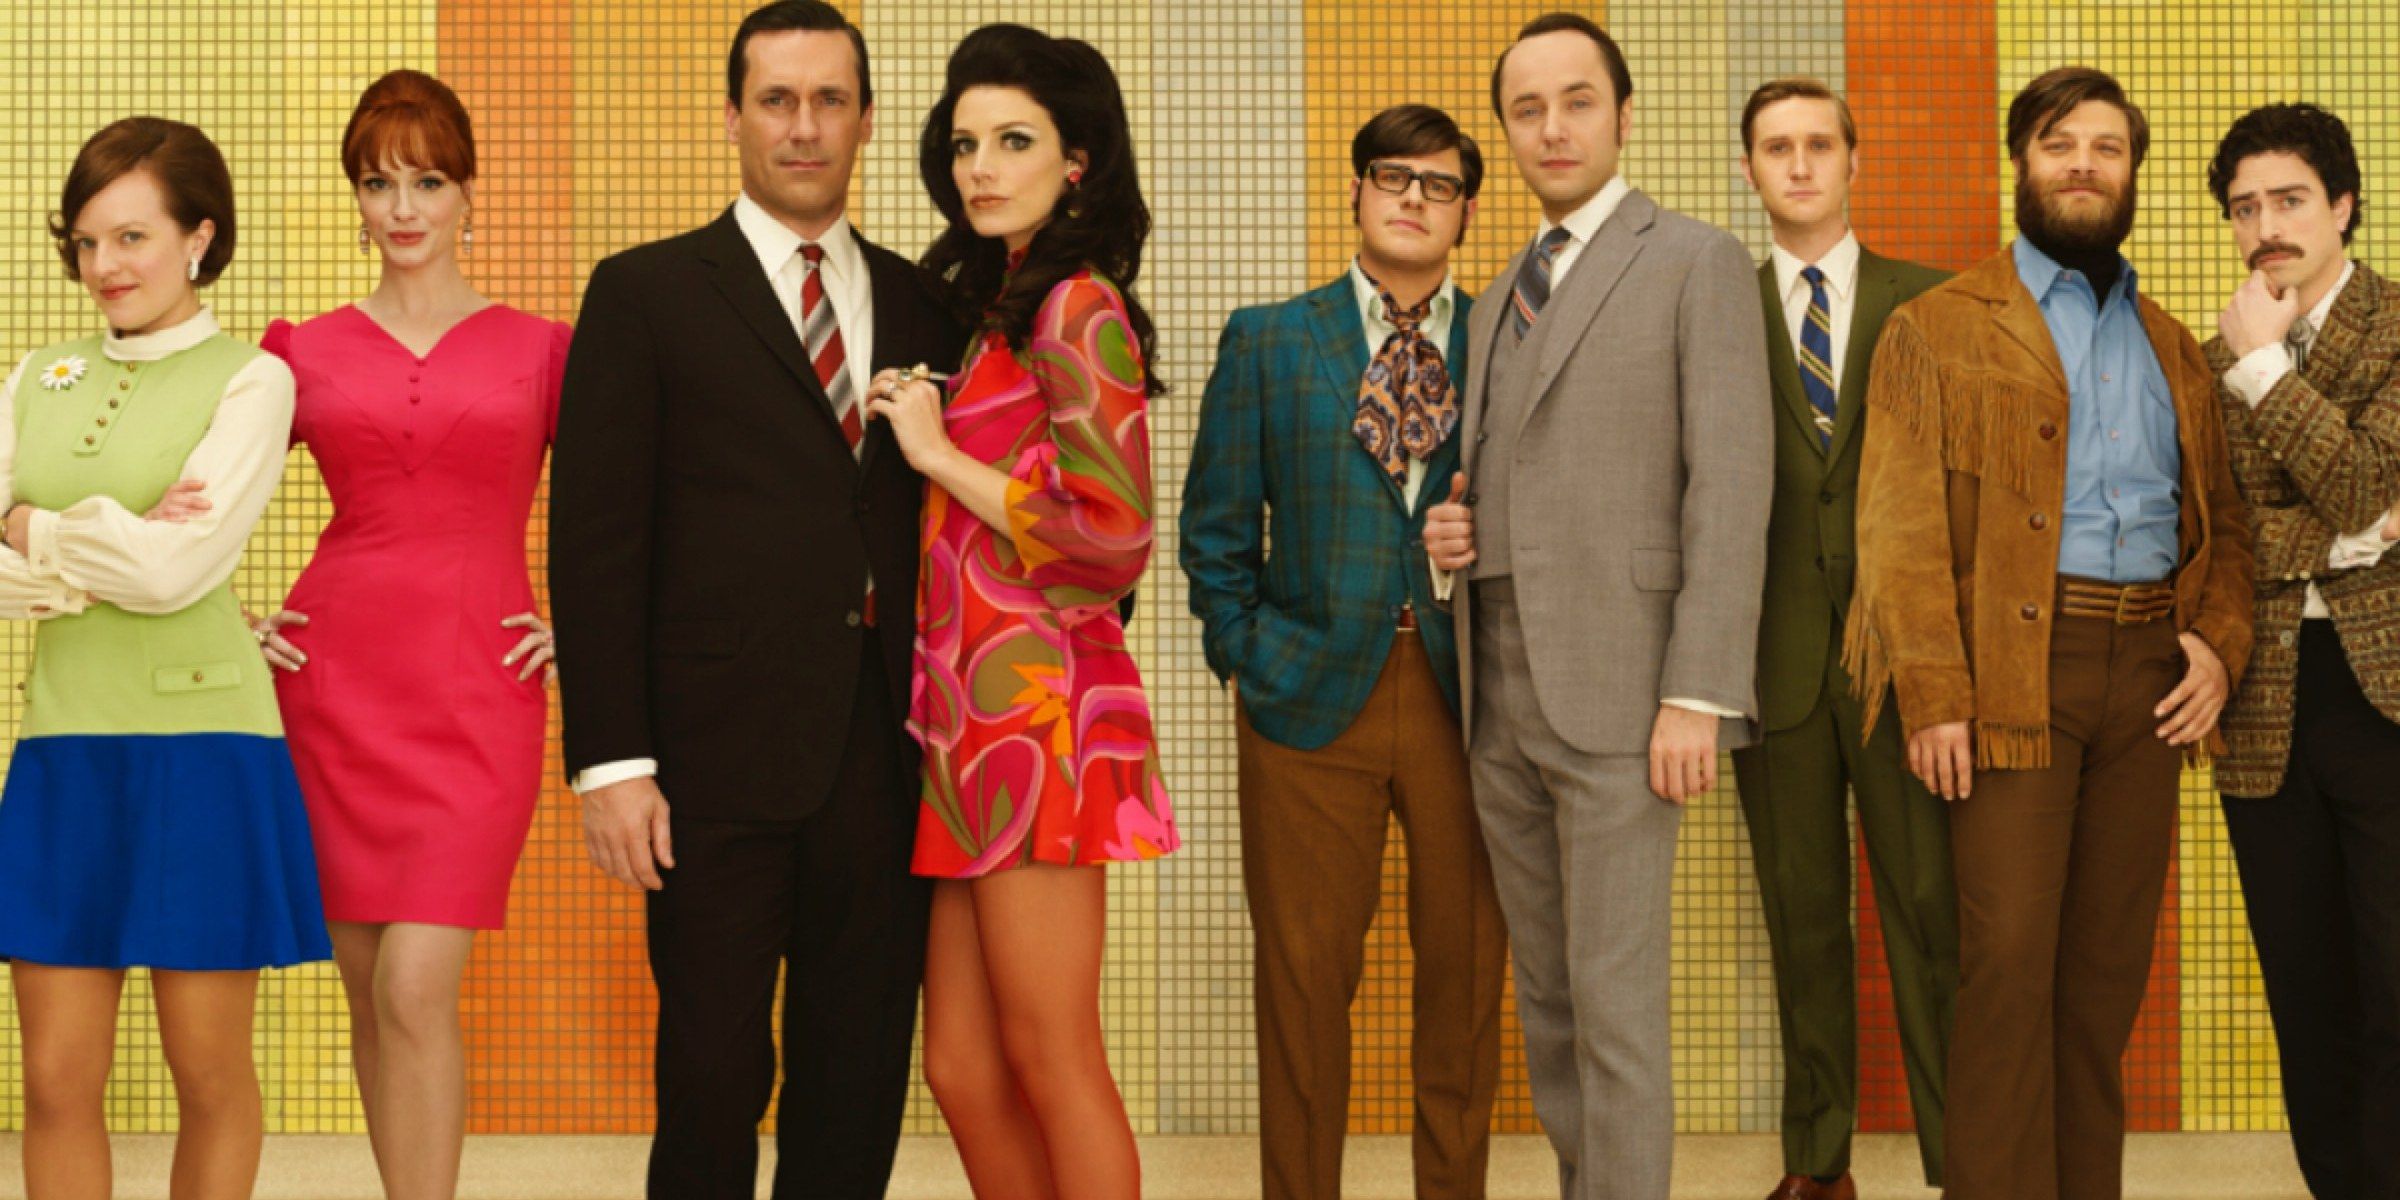 Mad Men: 10 Hidden Details About The Main Characters Everyone Missed